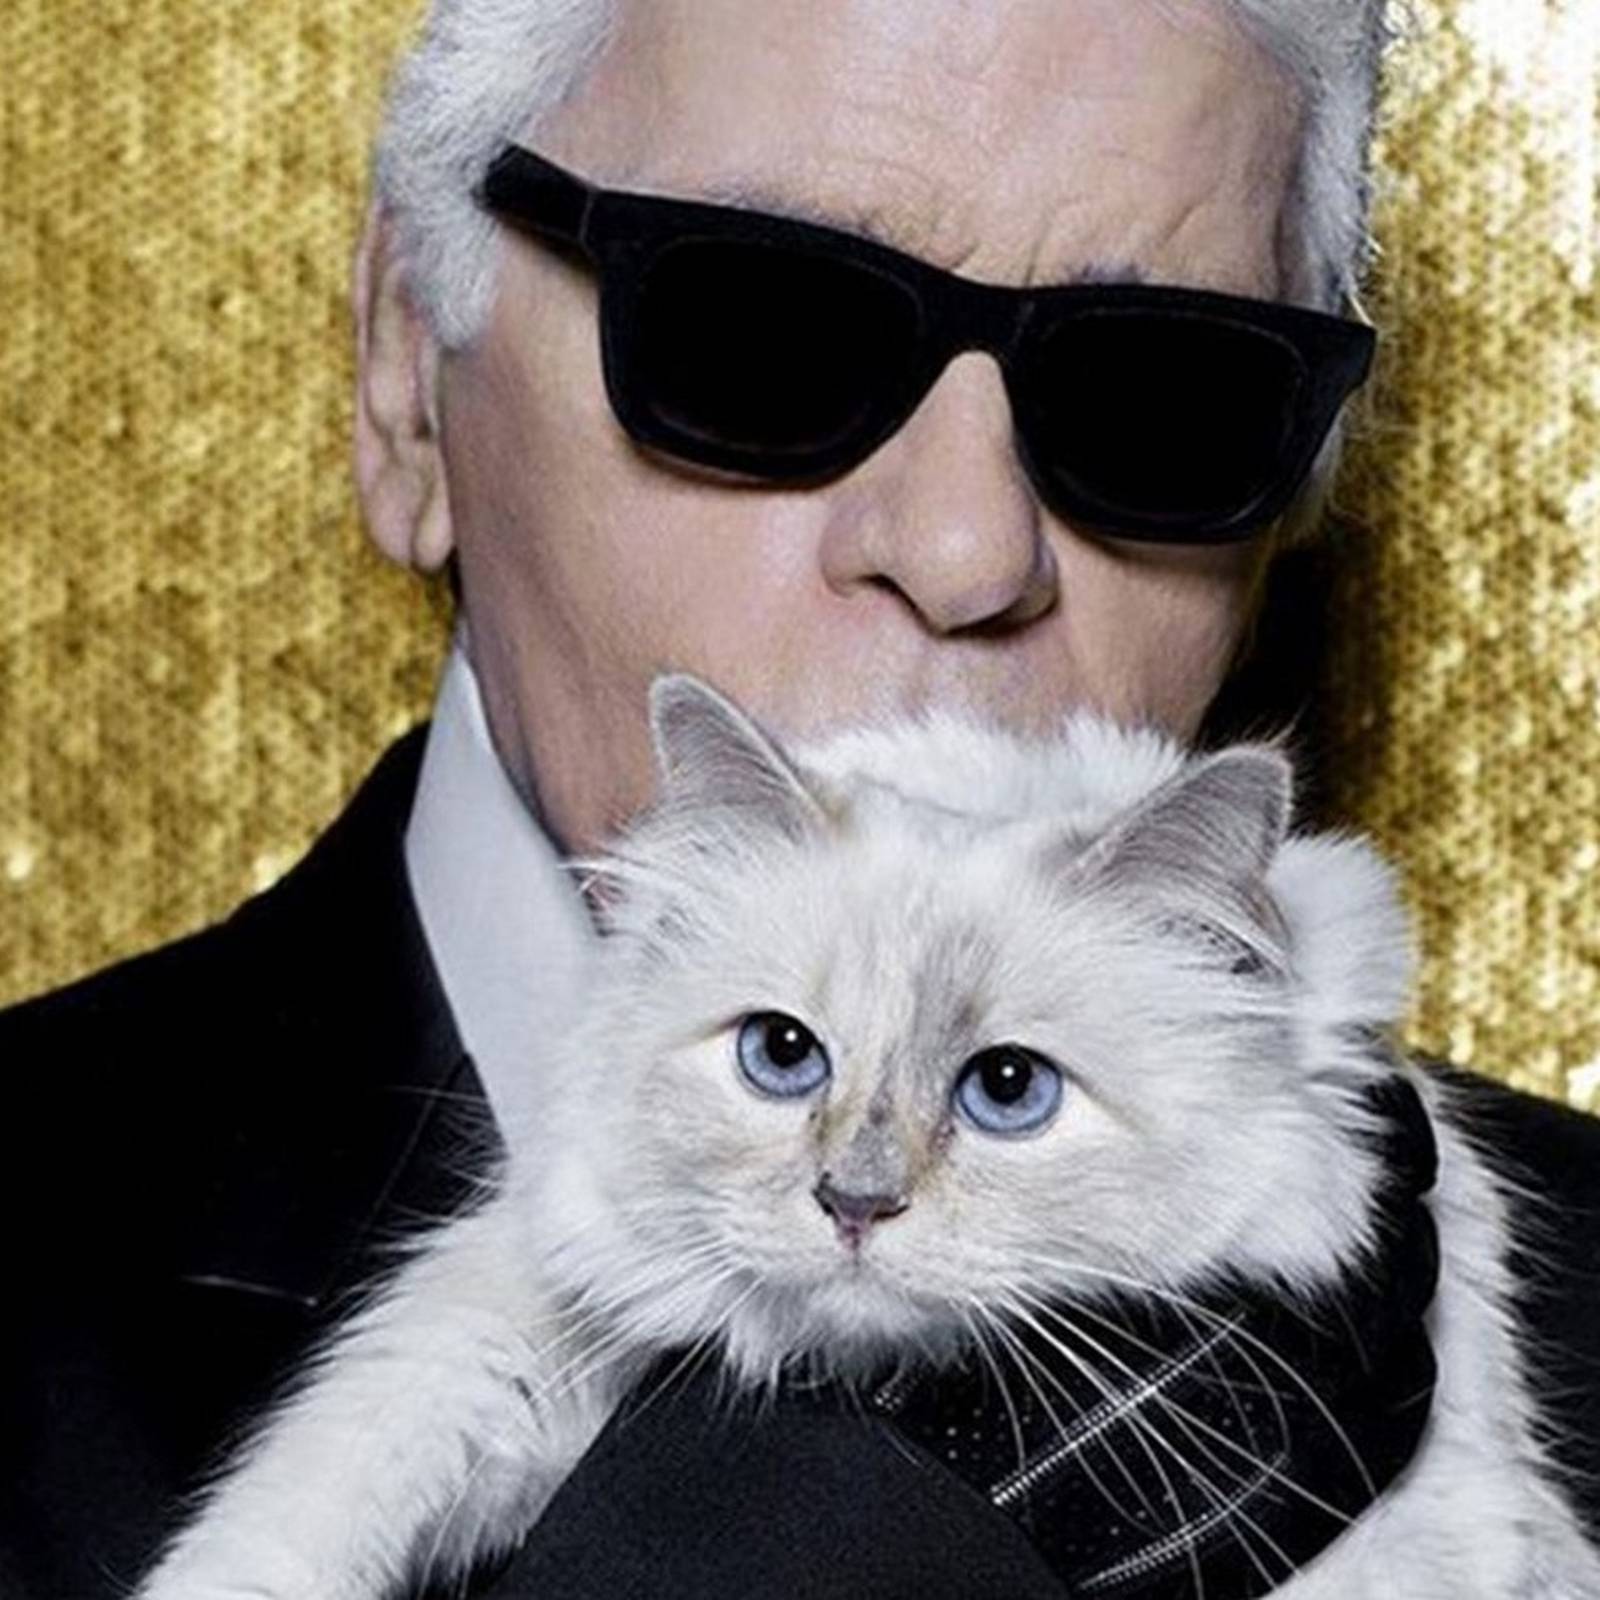 Choupette, Karl Lagerfeld's cat, became an Instagram star